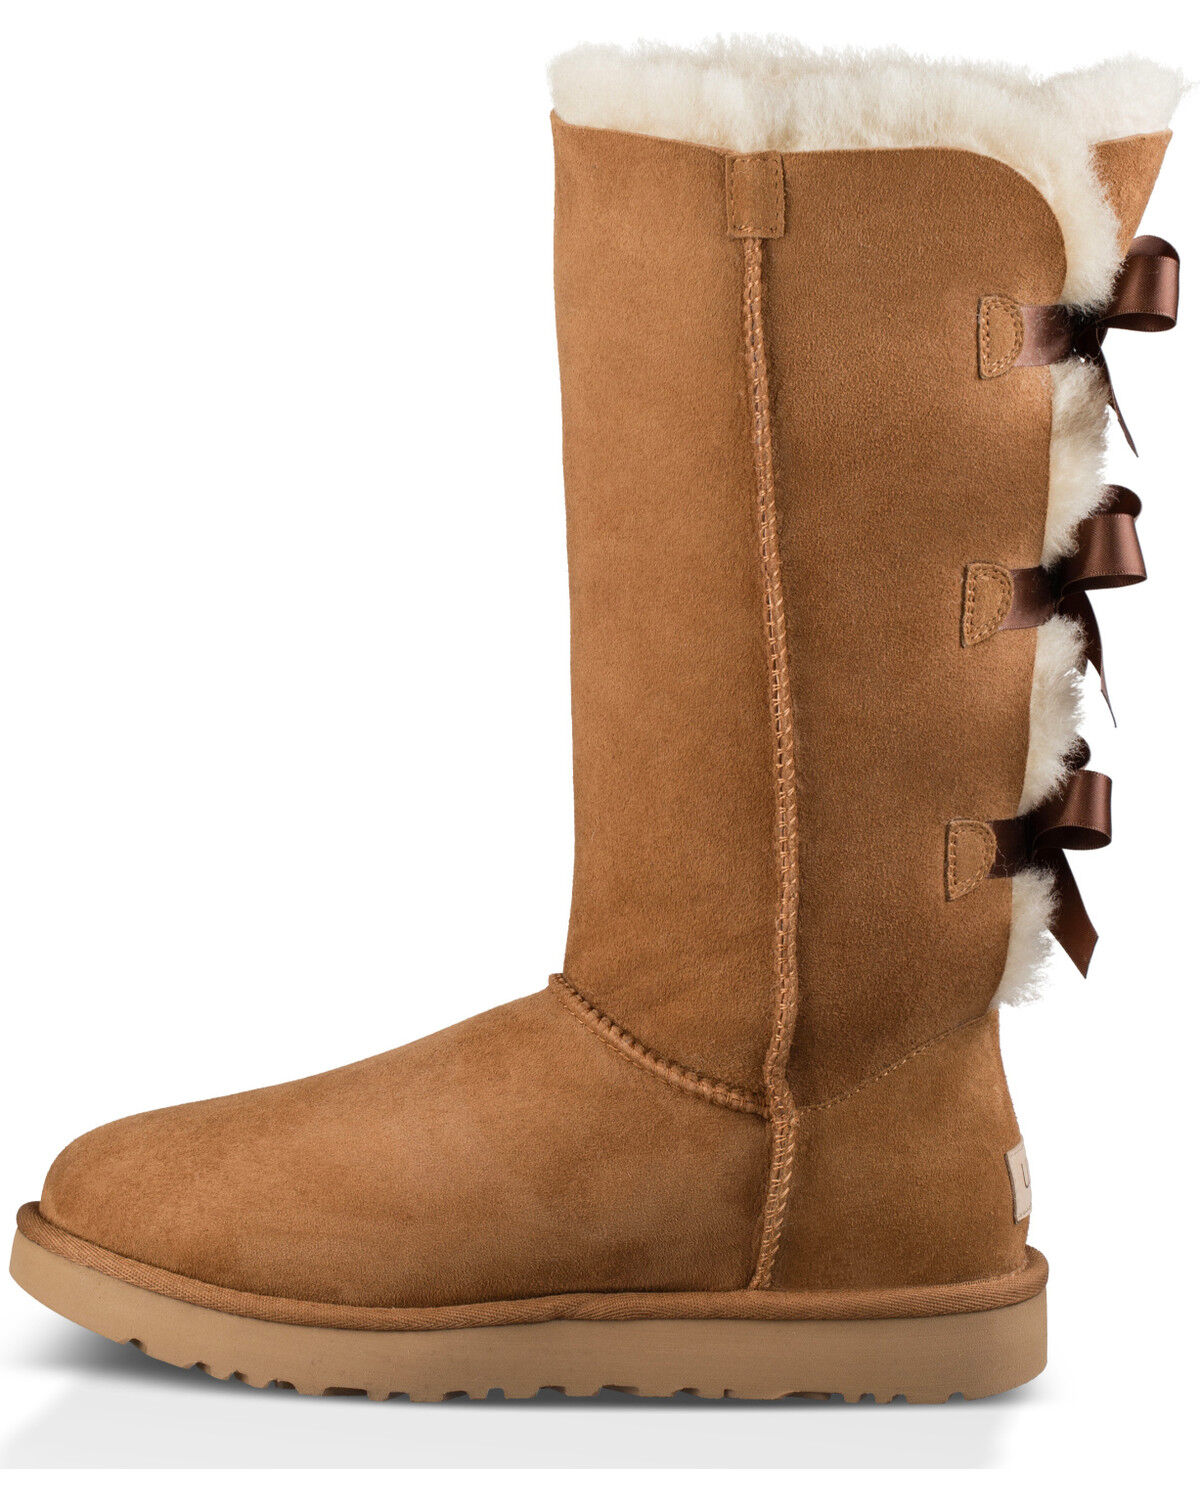 tall brown uggs with bows